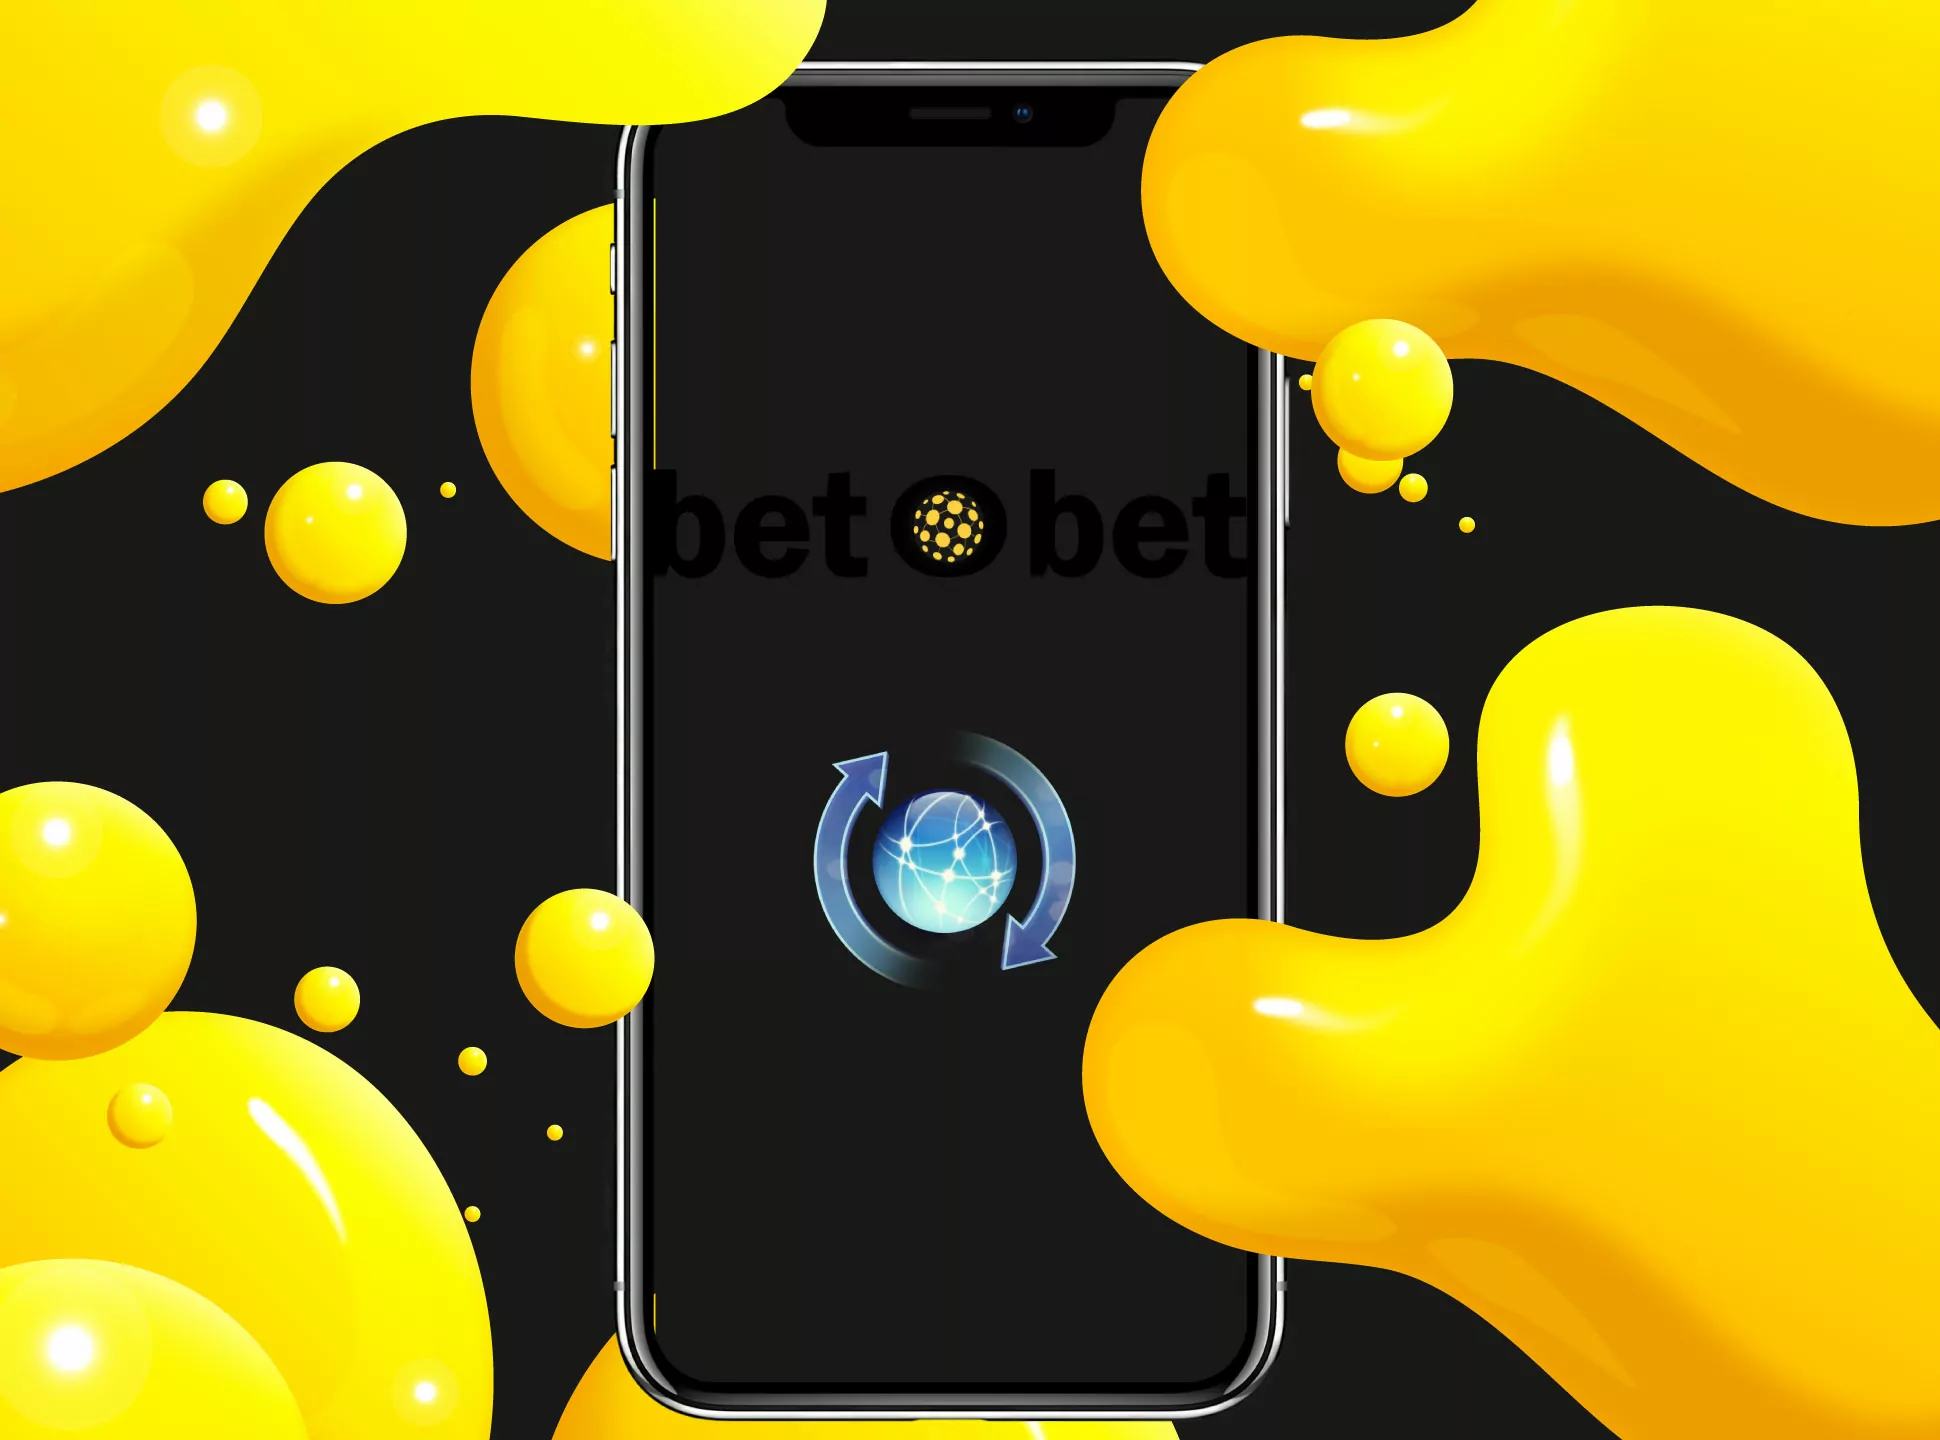 To update the Betobet app it's enough to download the latest version from the official site.